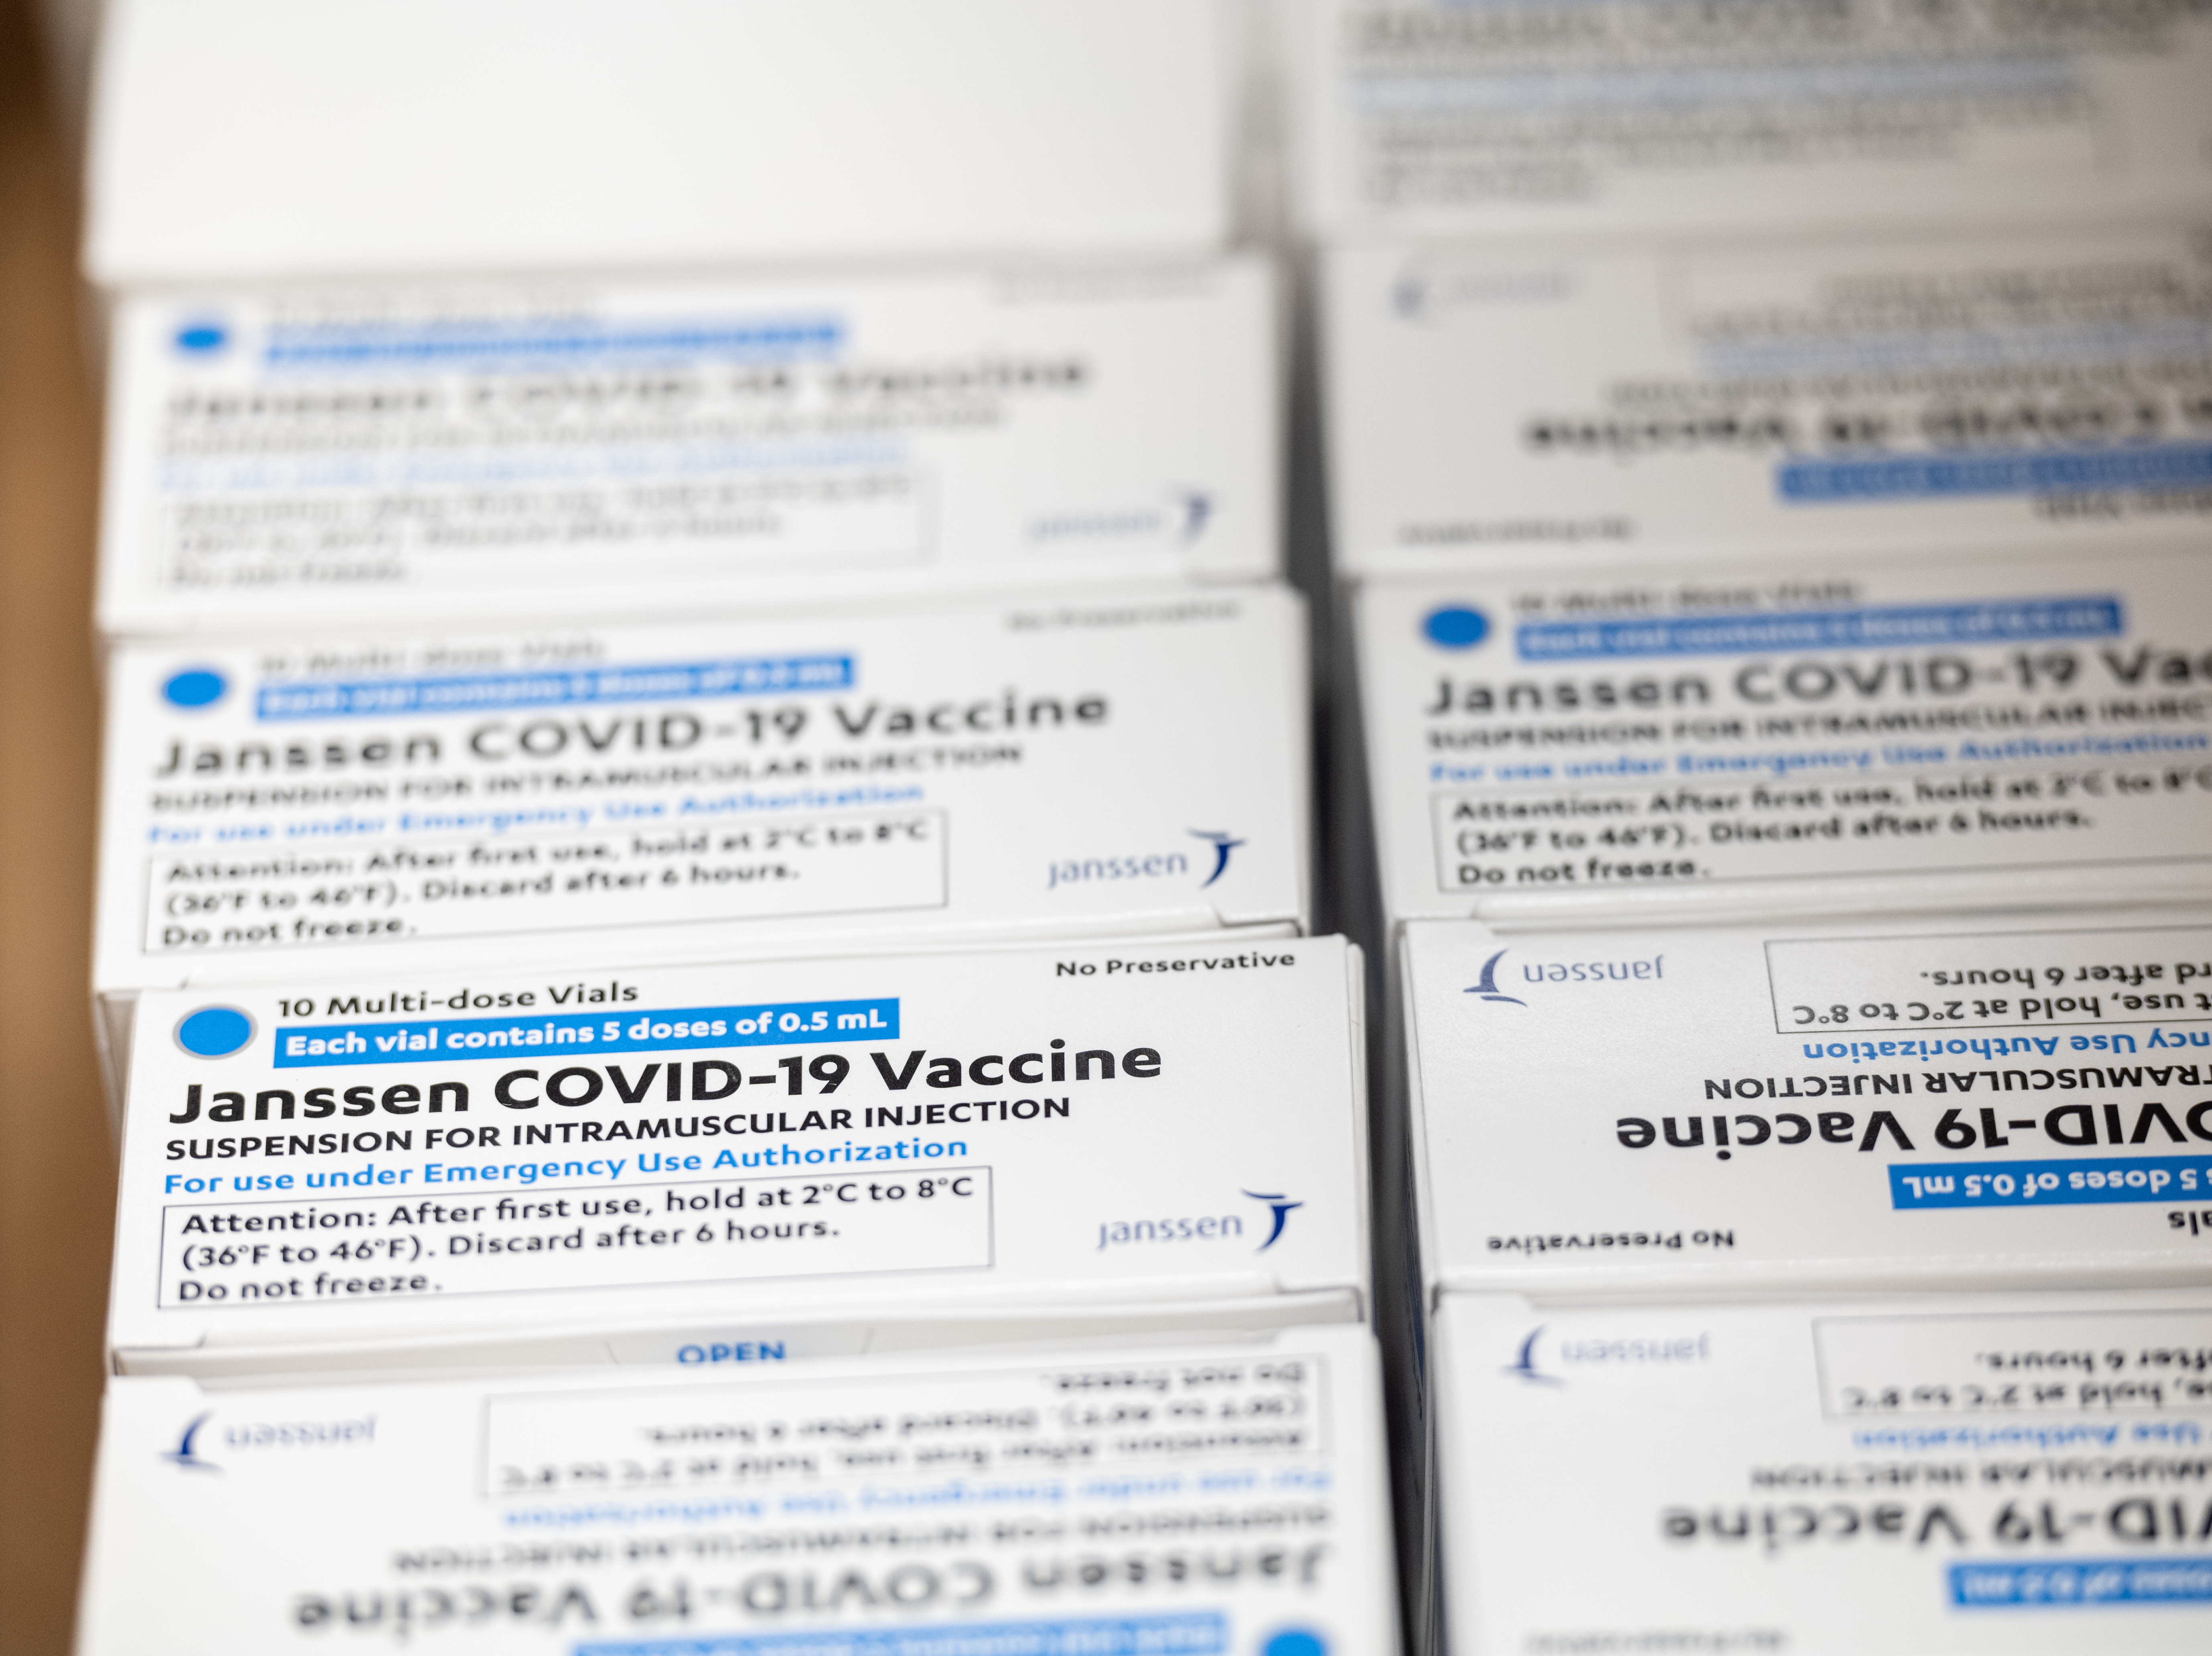 Boxes containing vials of the Janssen COVID-19 vaccine sit in a container before being transported to a refrigeration unit at Louisville Metro Health and Wellness headquarters on March 4 in Louisville, Ky. The FDA approved the third COVID-19 vaccine on Feb. 27. CREDIT: Jon Cherry/Getty Images